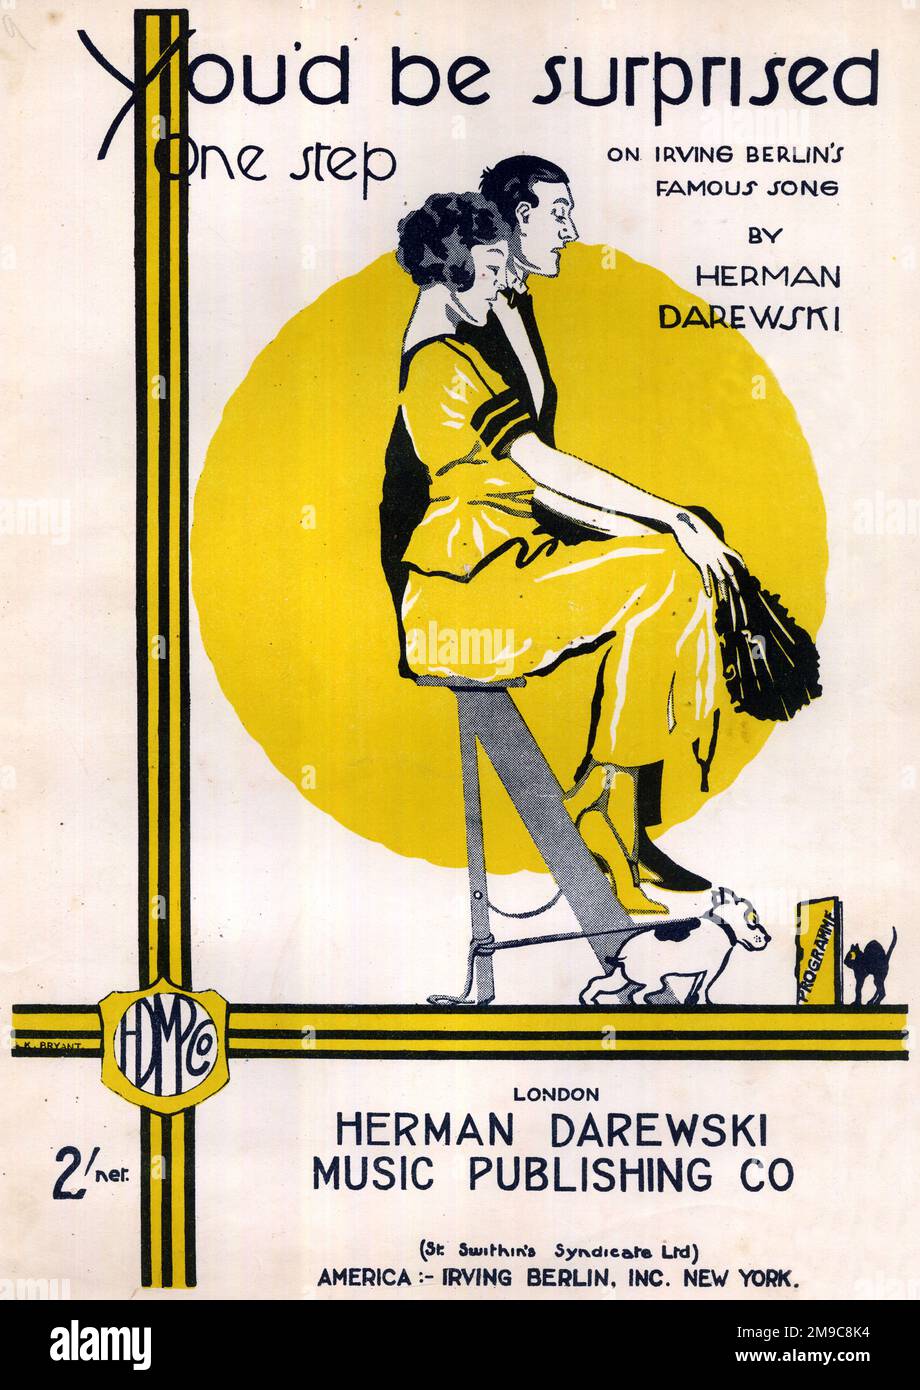 Music cover, You'd Be Surprised, one step, by Herman Darewski, based on Irving Berlin's famous song You'd be Surprised. Stock Photo